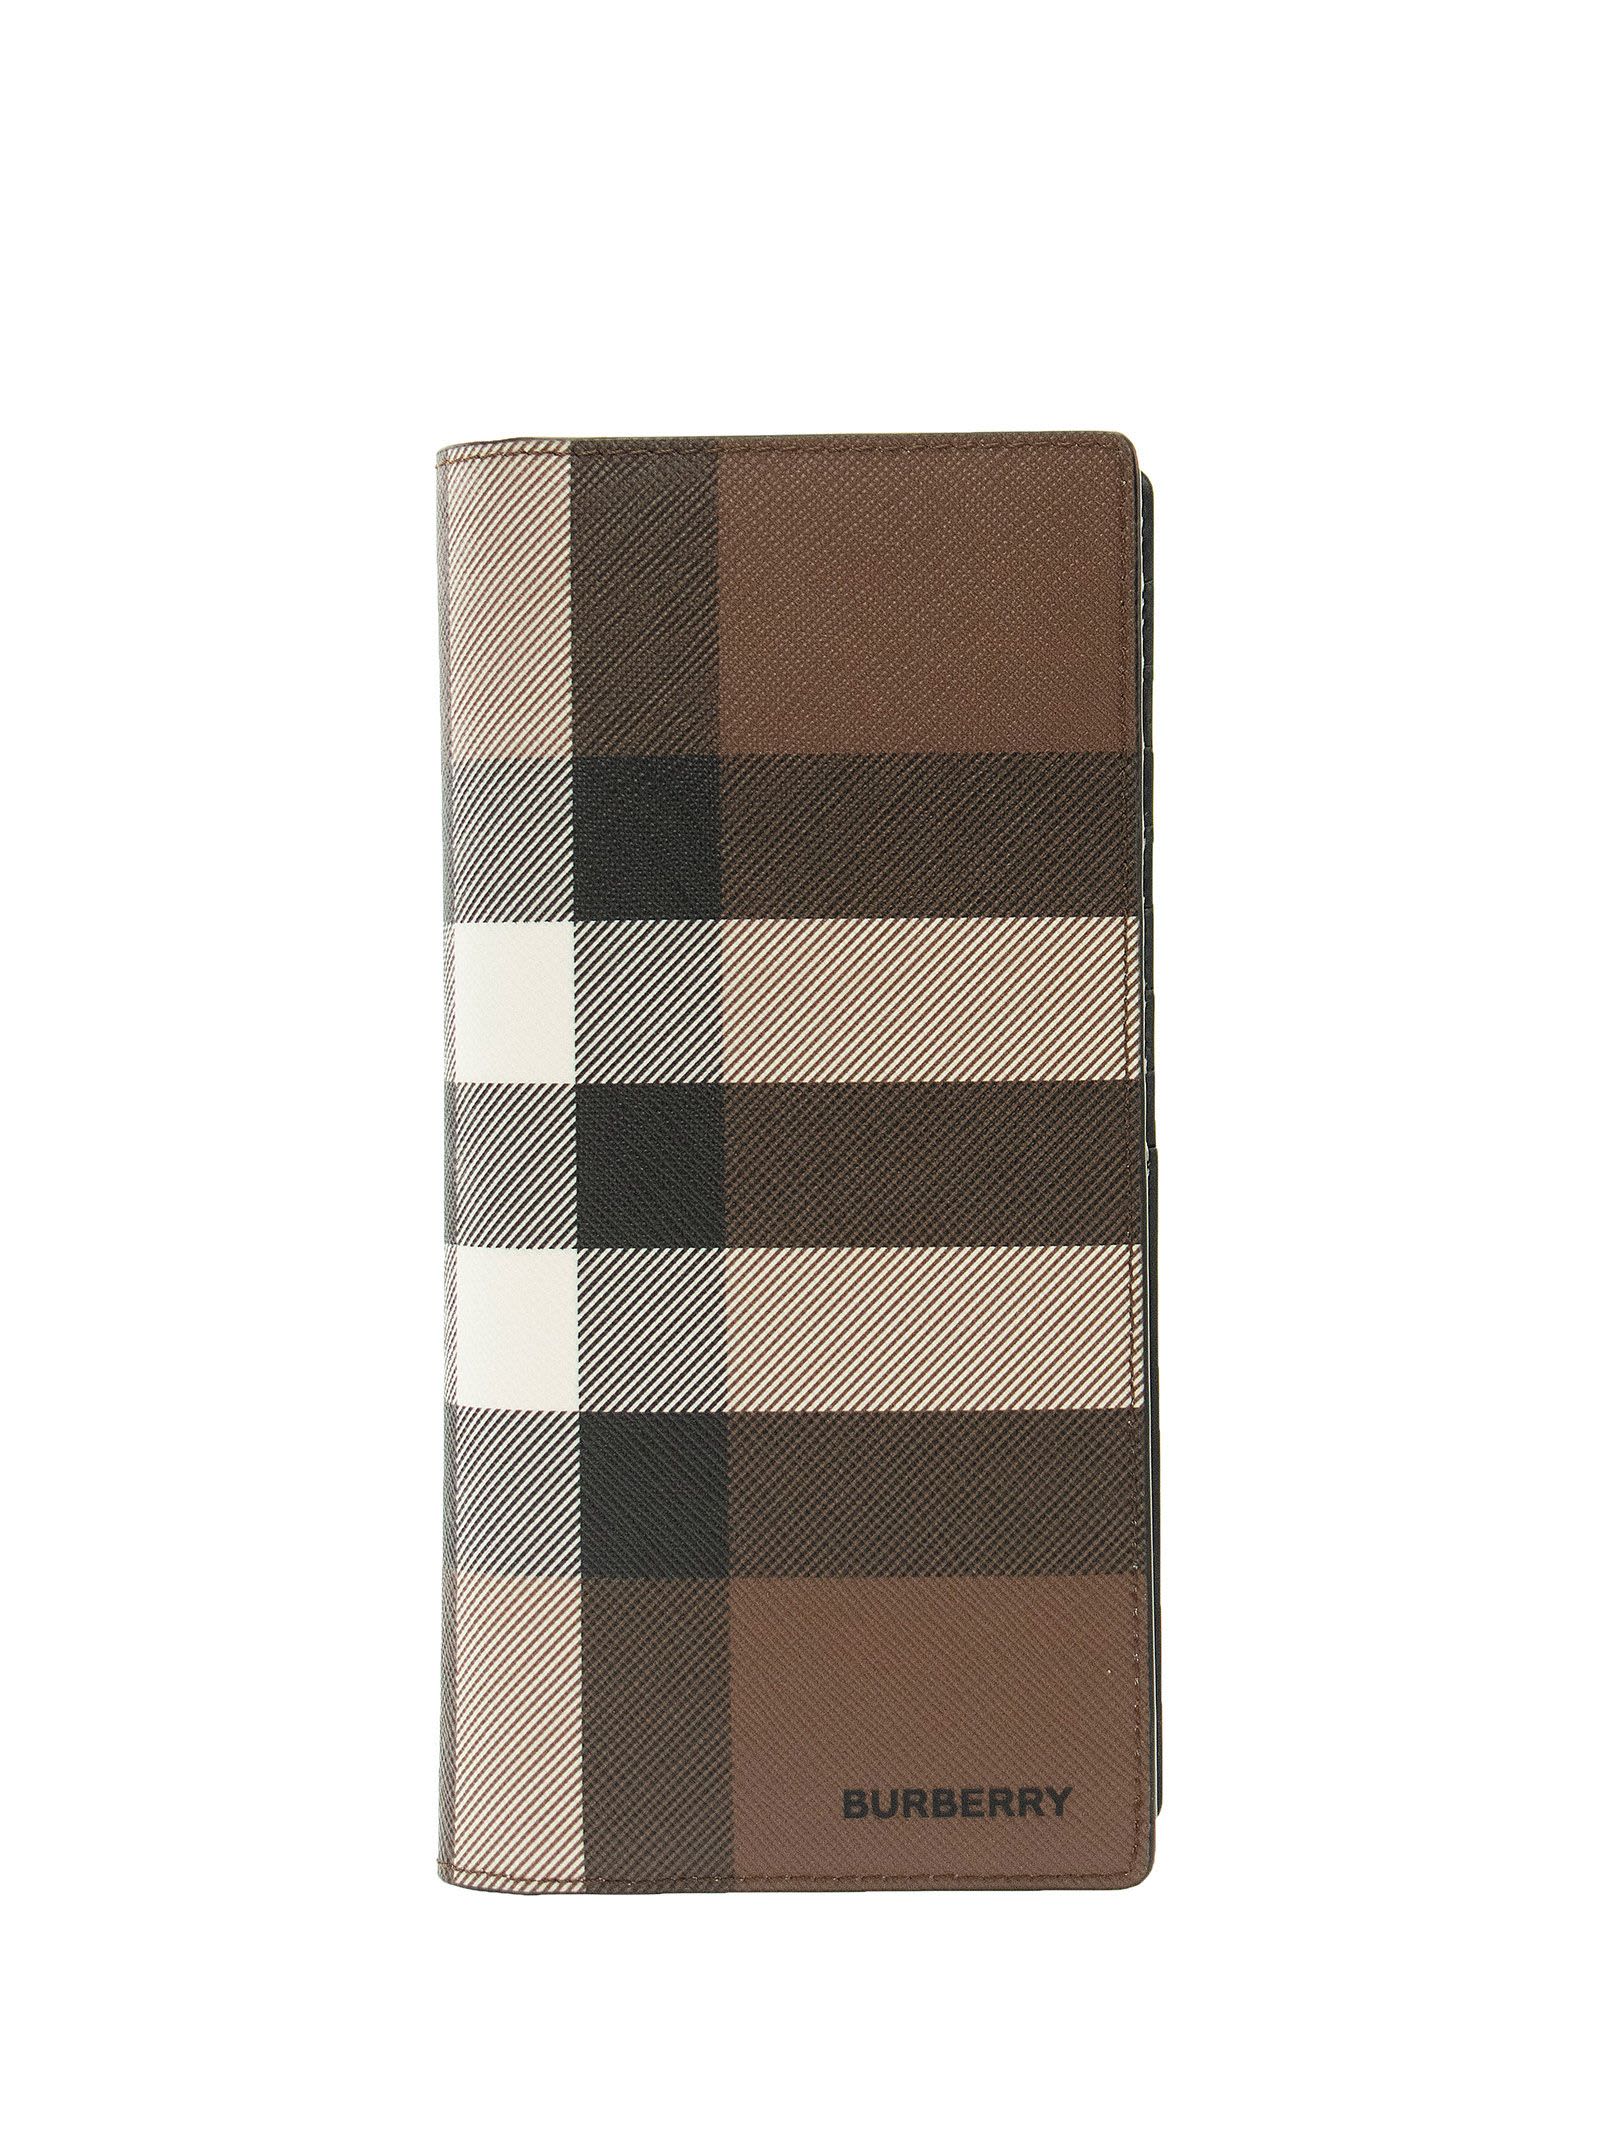 Burberry London Check And Leather Continental Wallet In Marrone